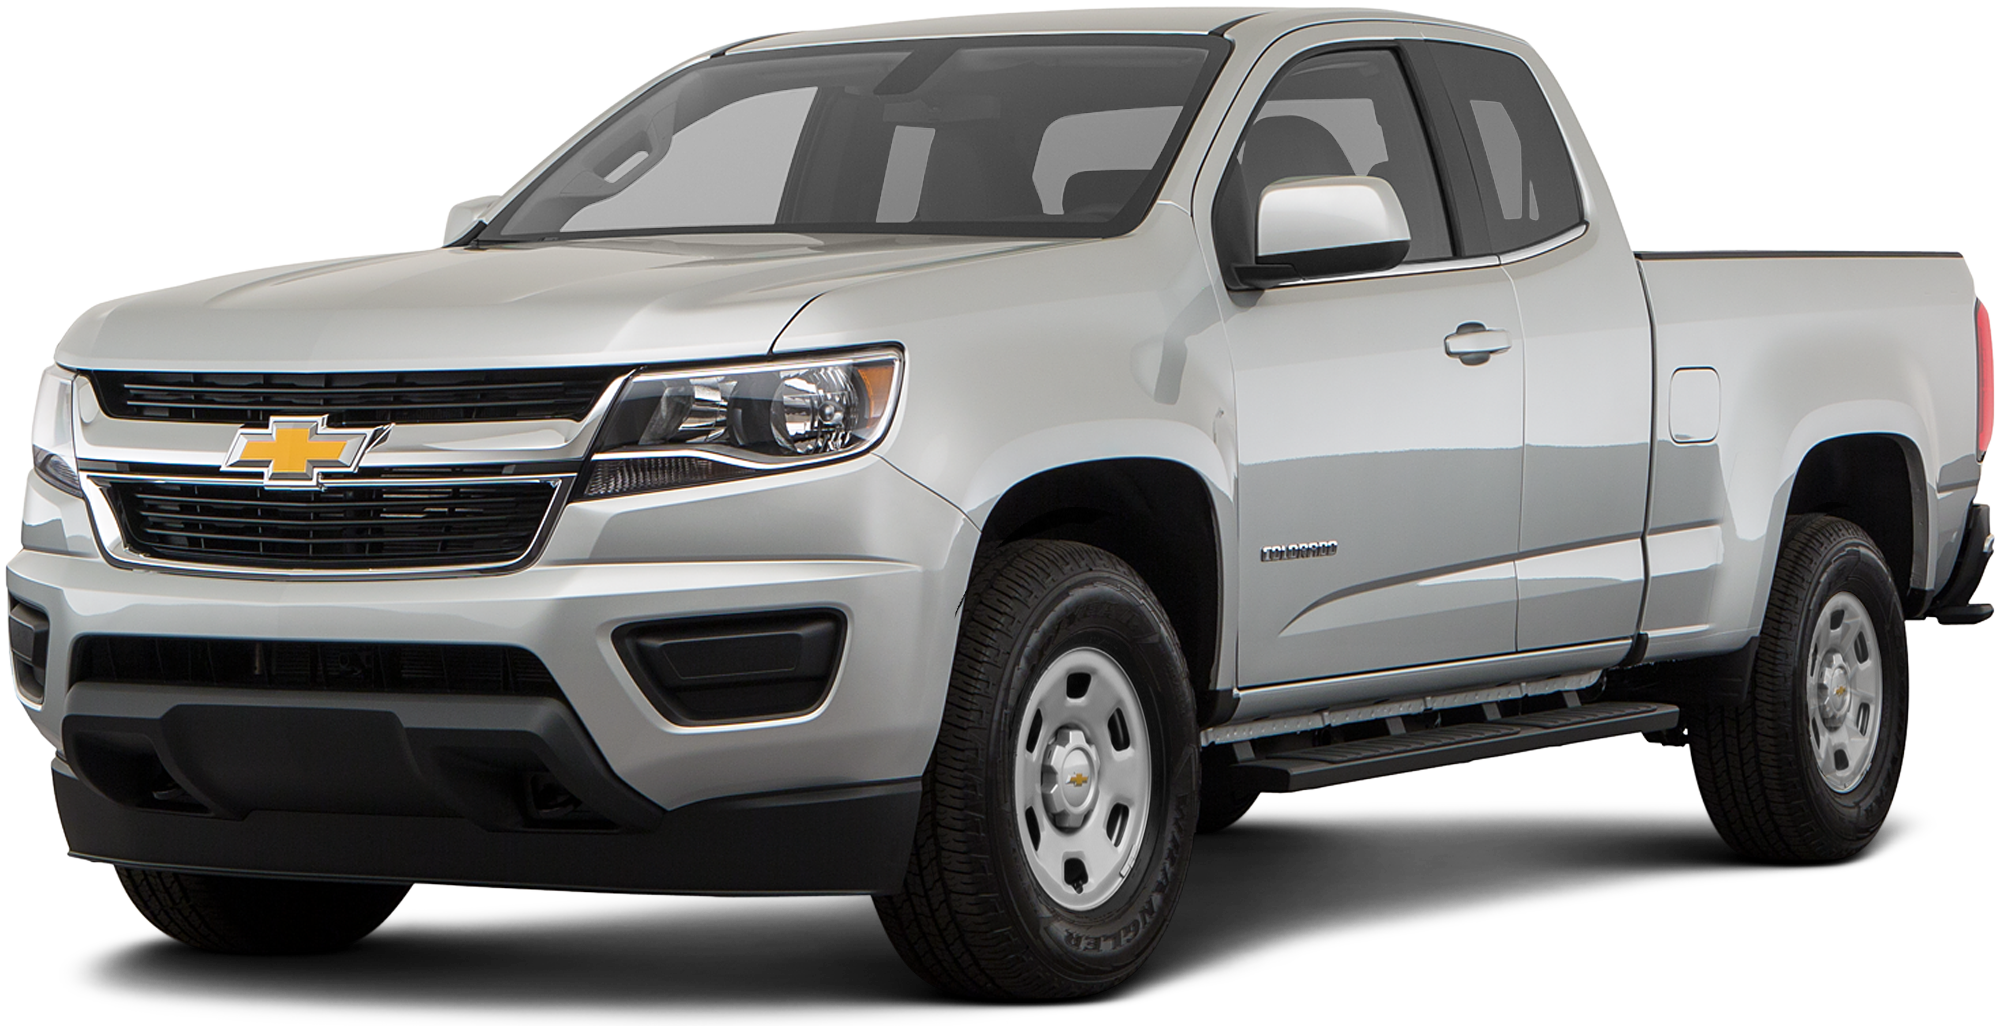 2020 Chevrolet Colorado Incentives, Specials & Offers in Kellogg ID